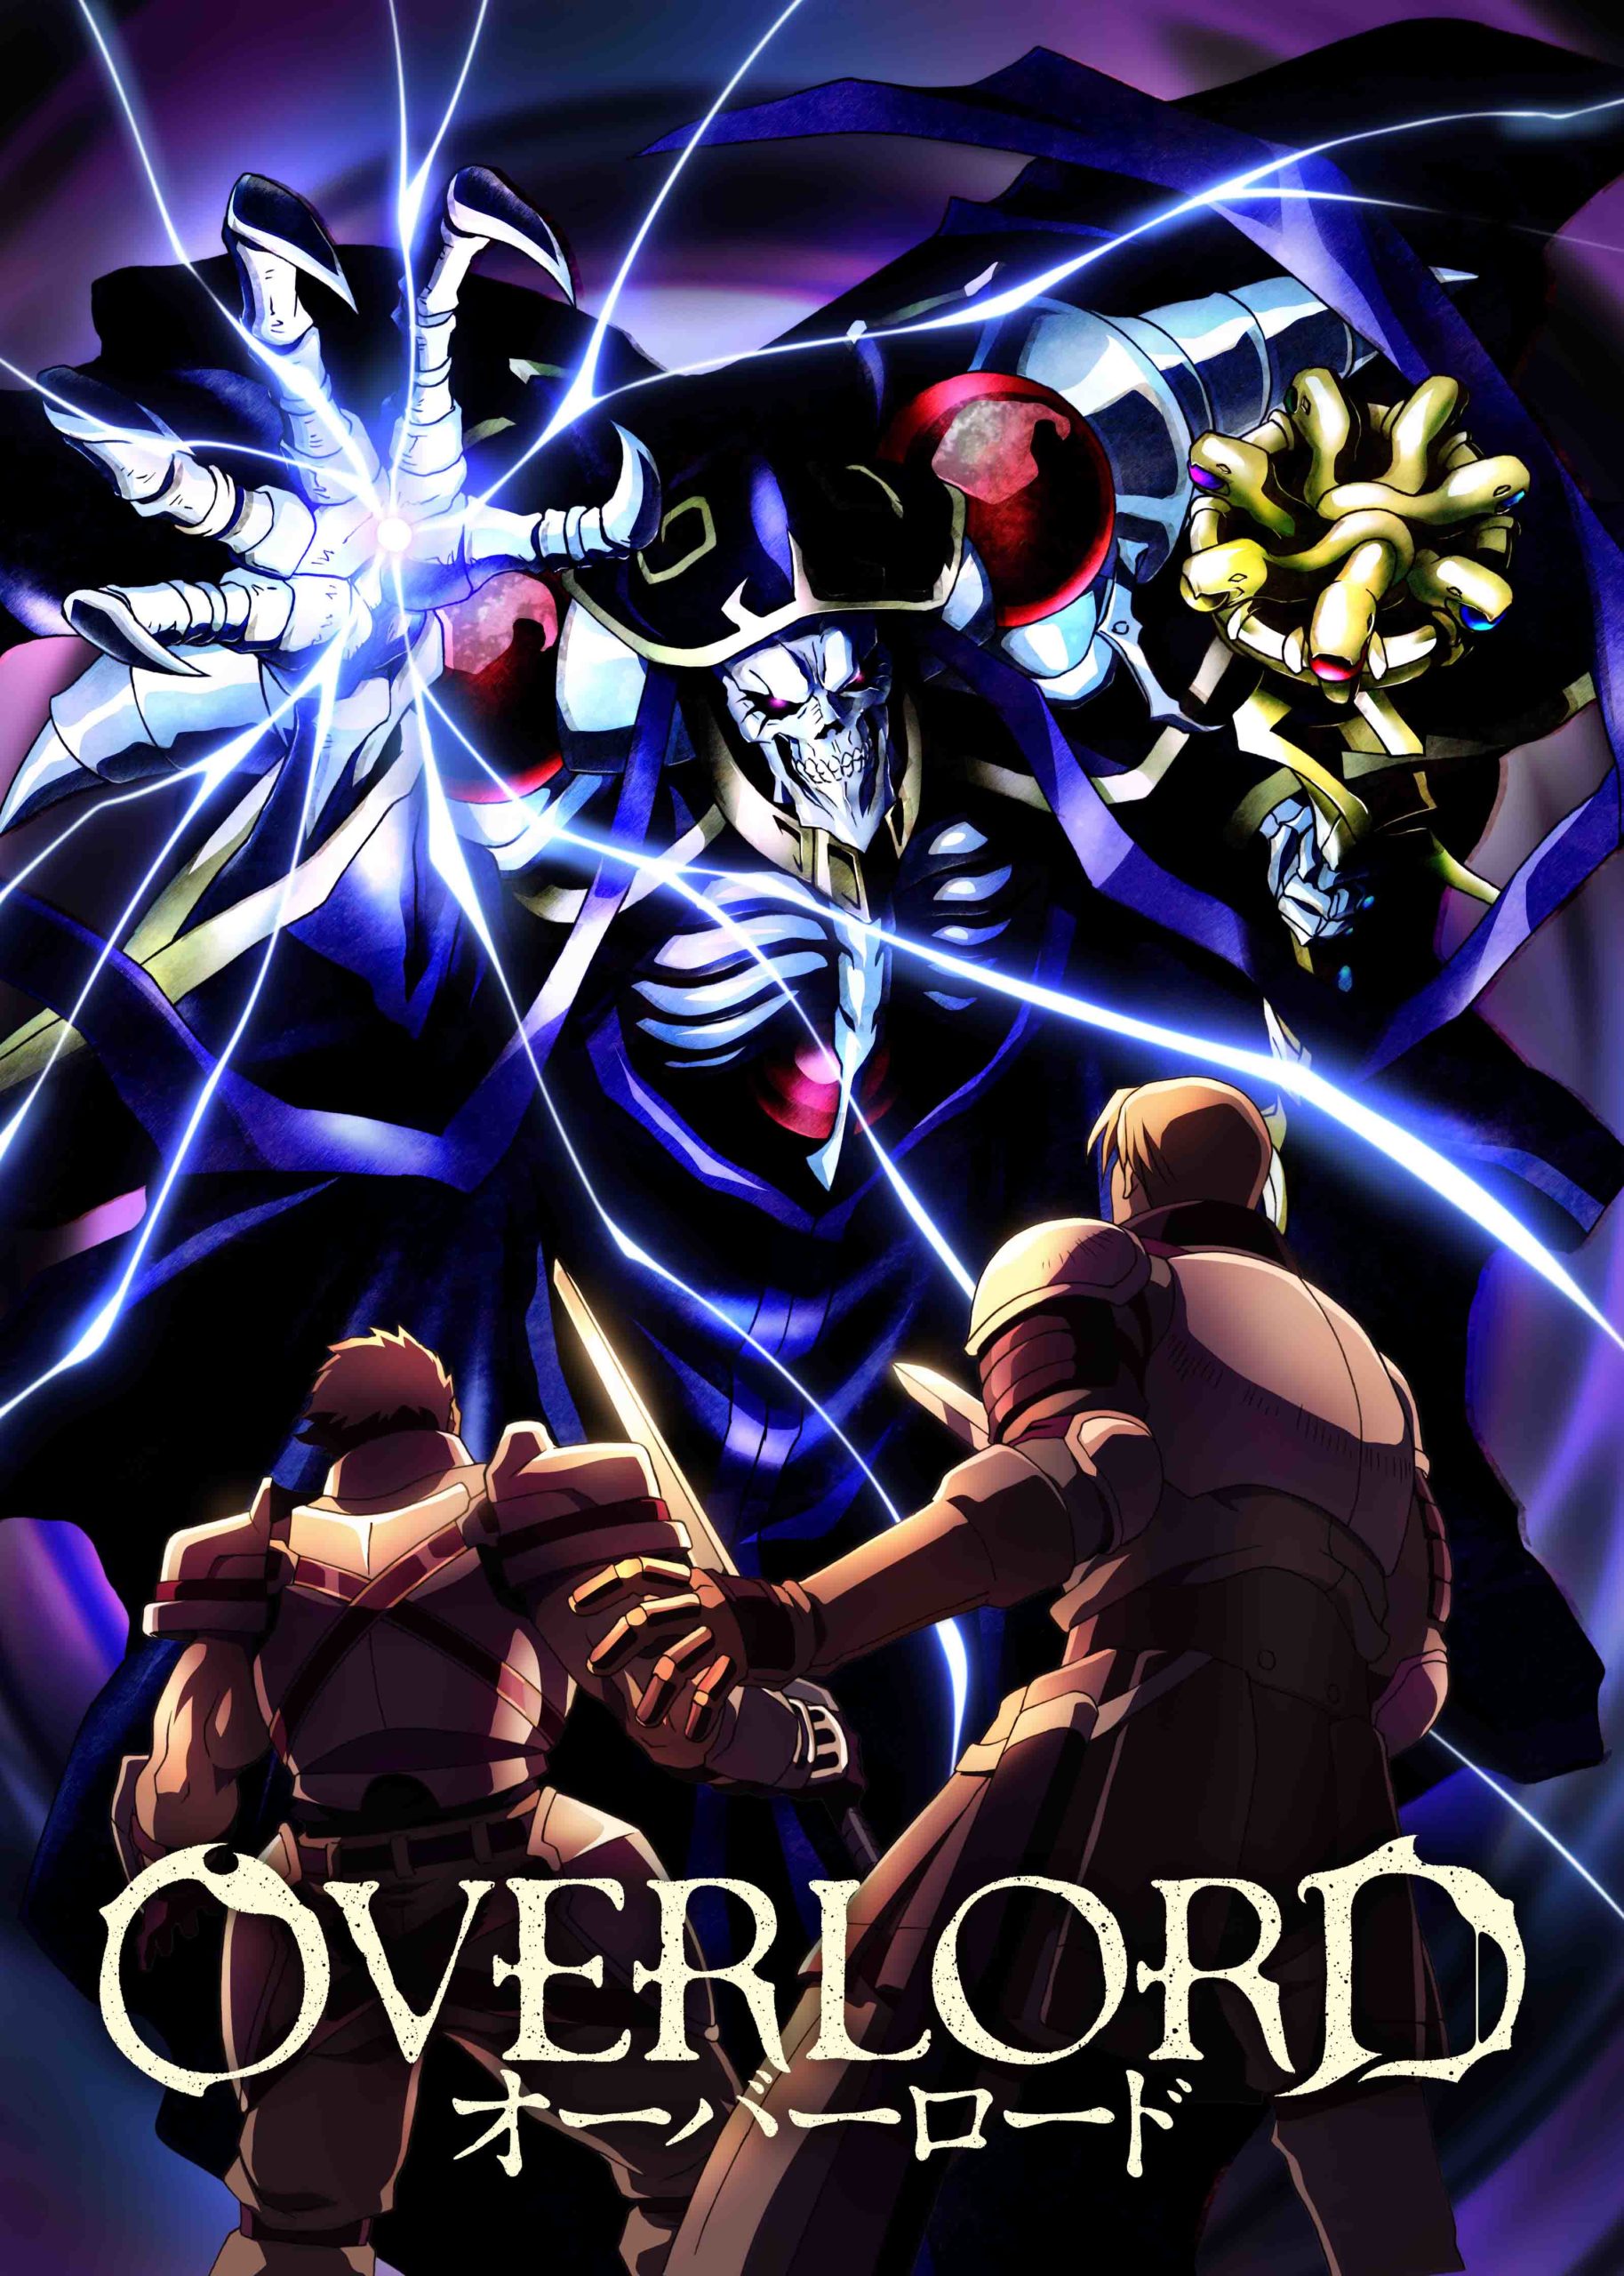 Overlord
